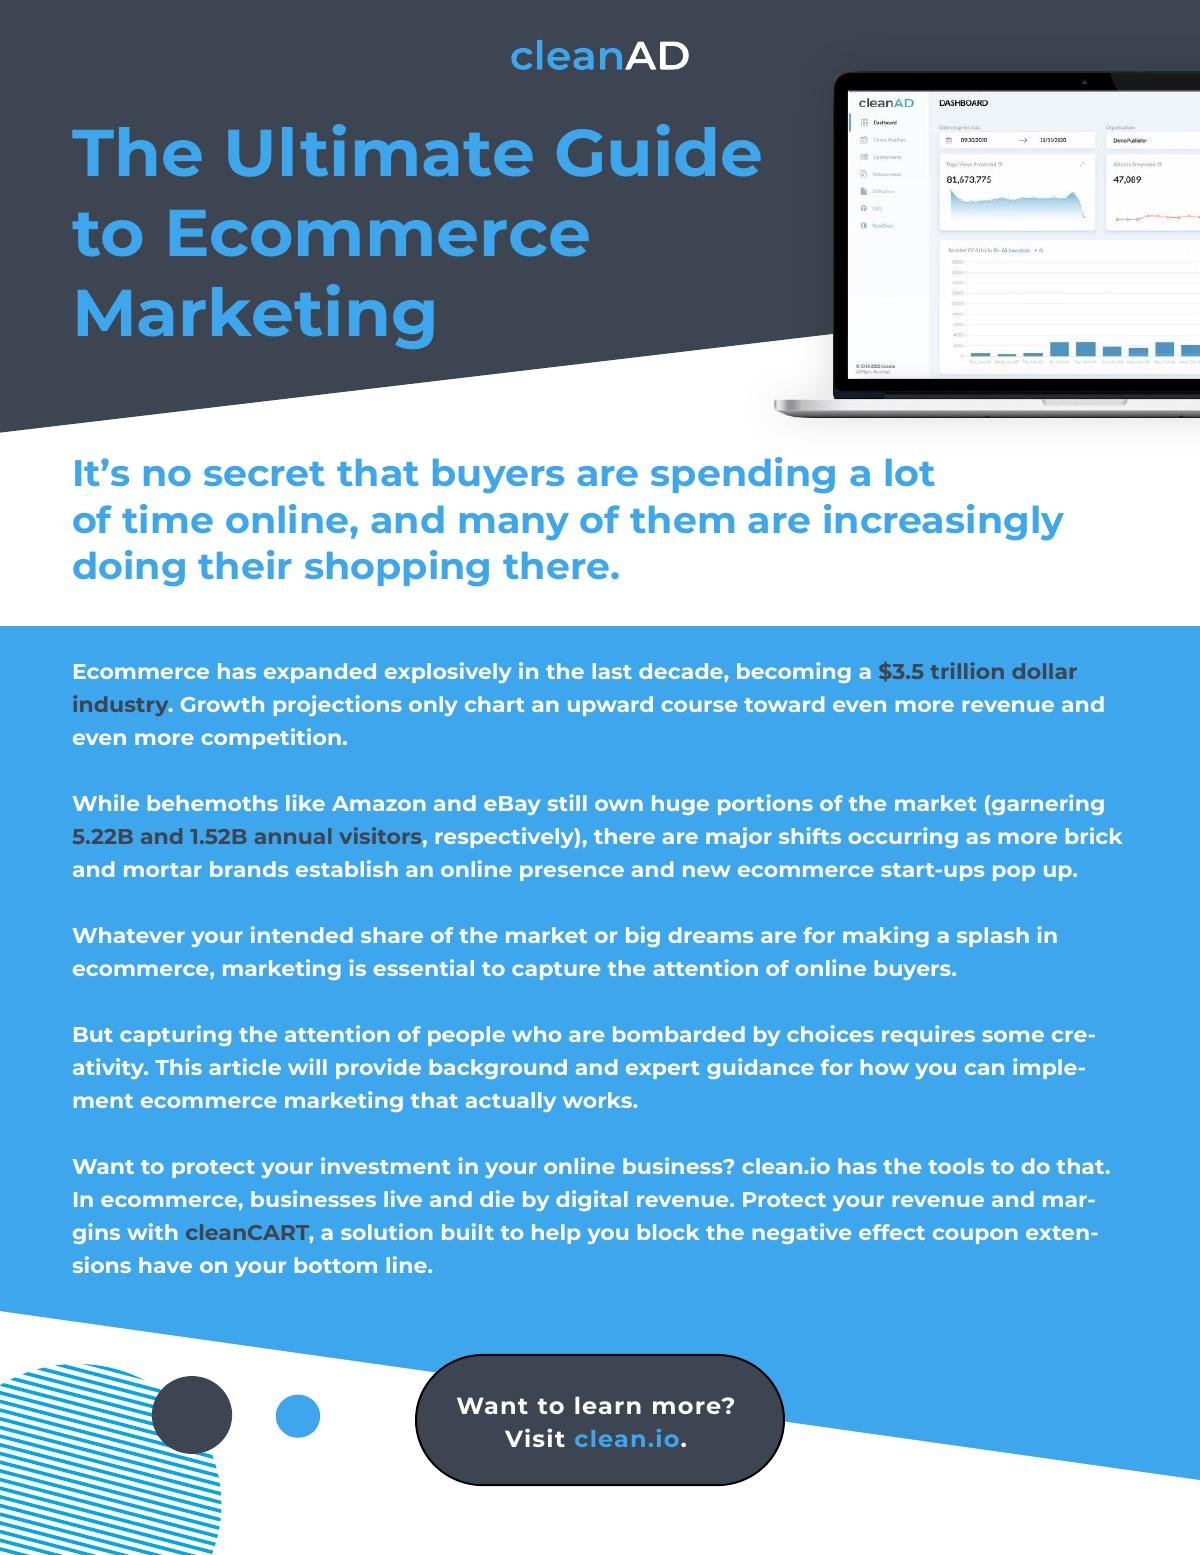 The Ultimate Guide to eCommerce Marketing